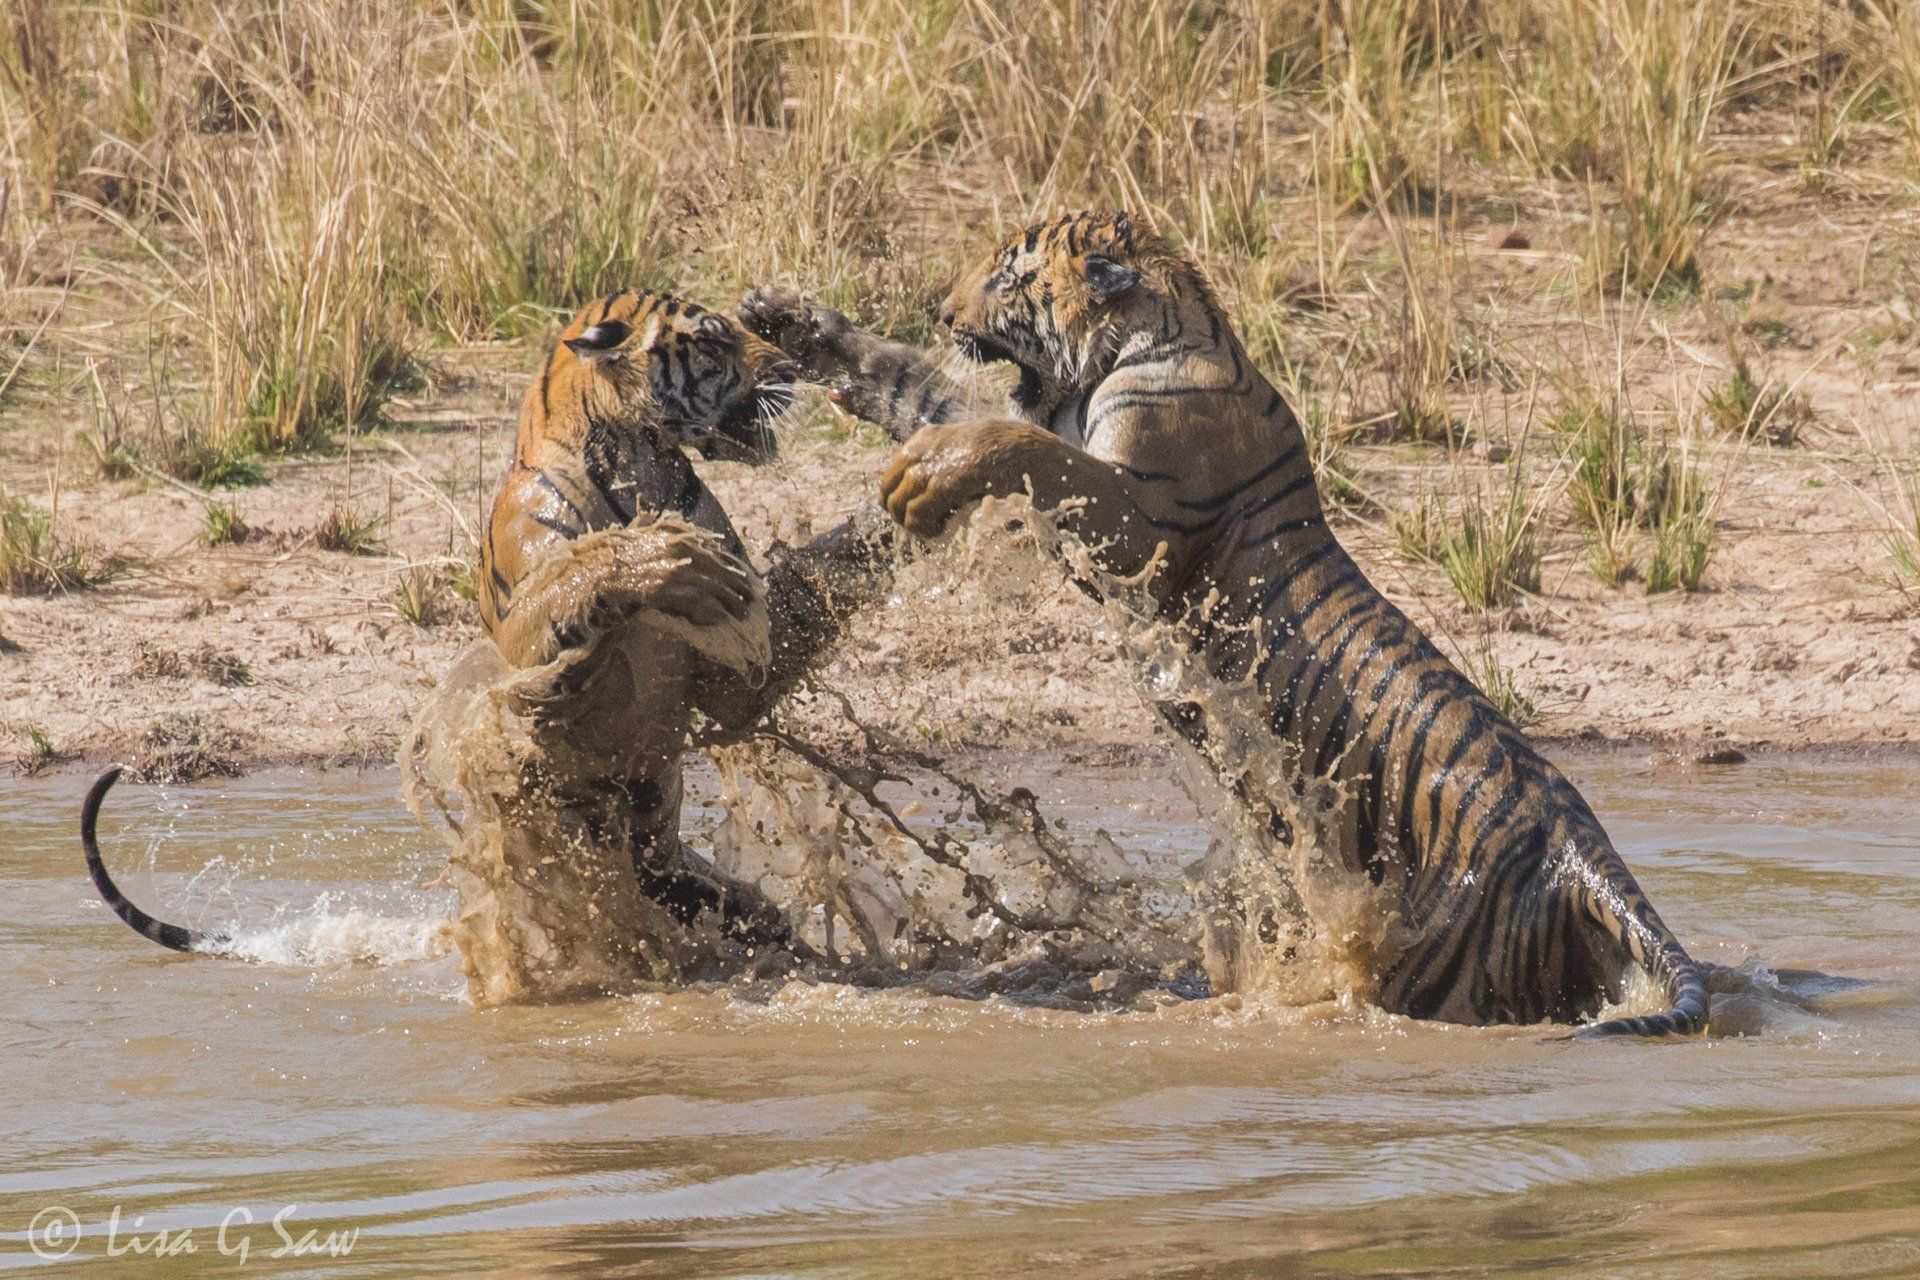 Two young tigers play fighting in water